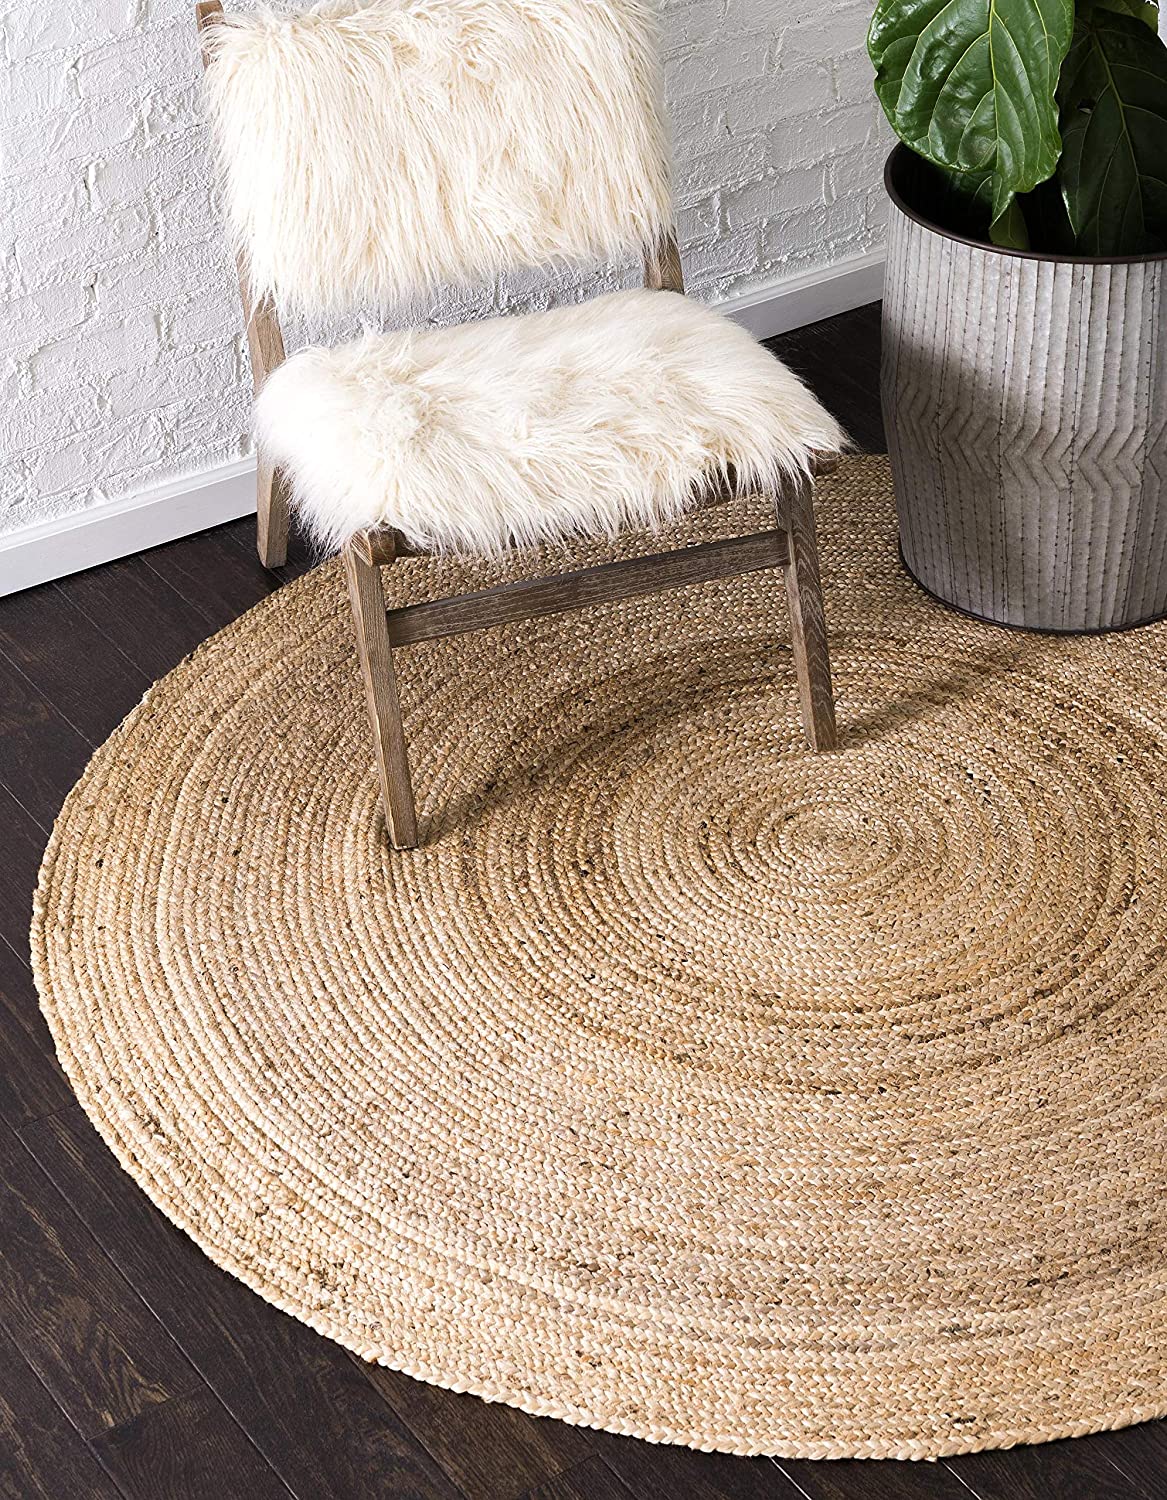 Braided Jute Collection Hand Woven Natural Fibers Natural/Tan Round Carpet